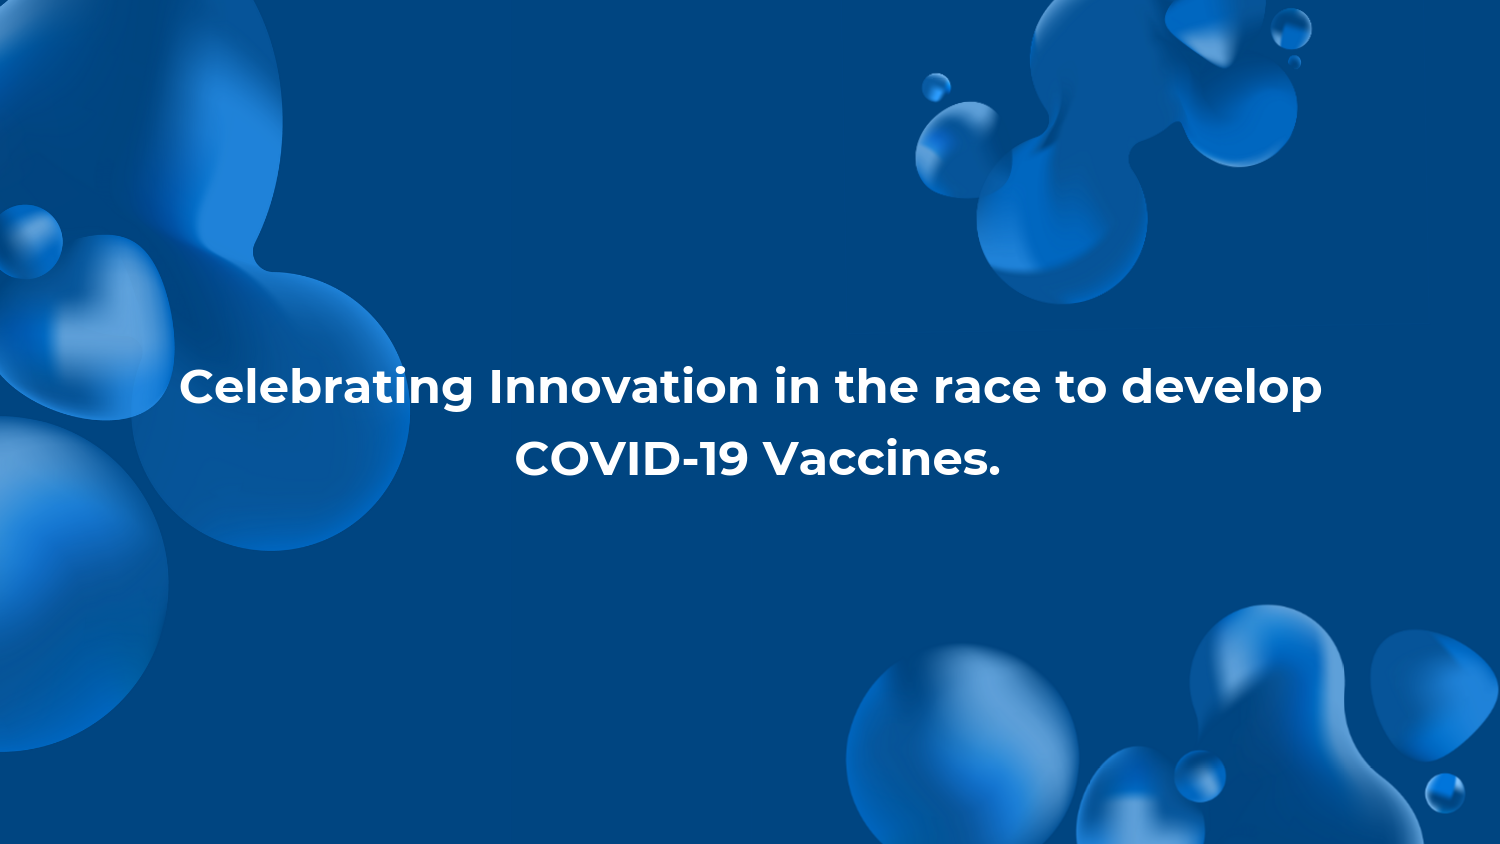 Innovation in the Race to Develop COVID-19 Vaccines